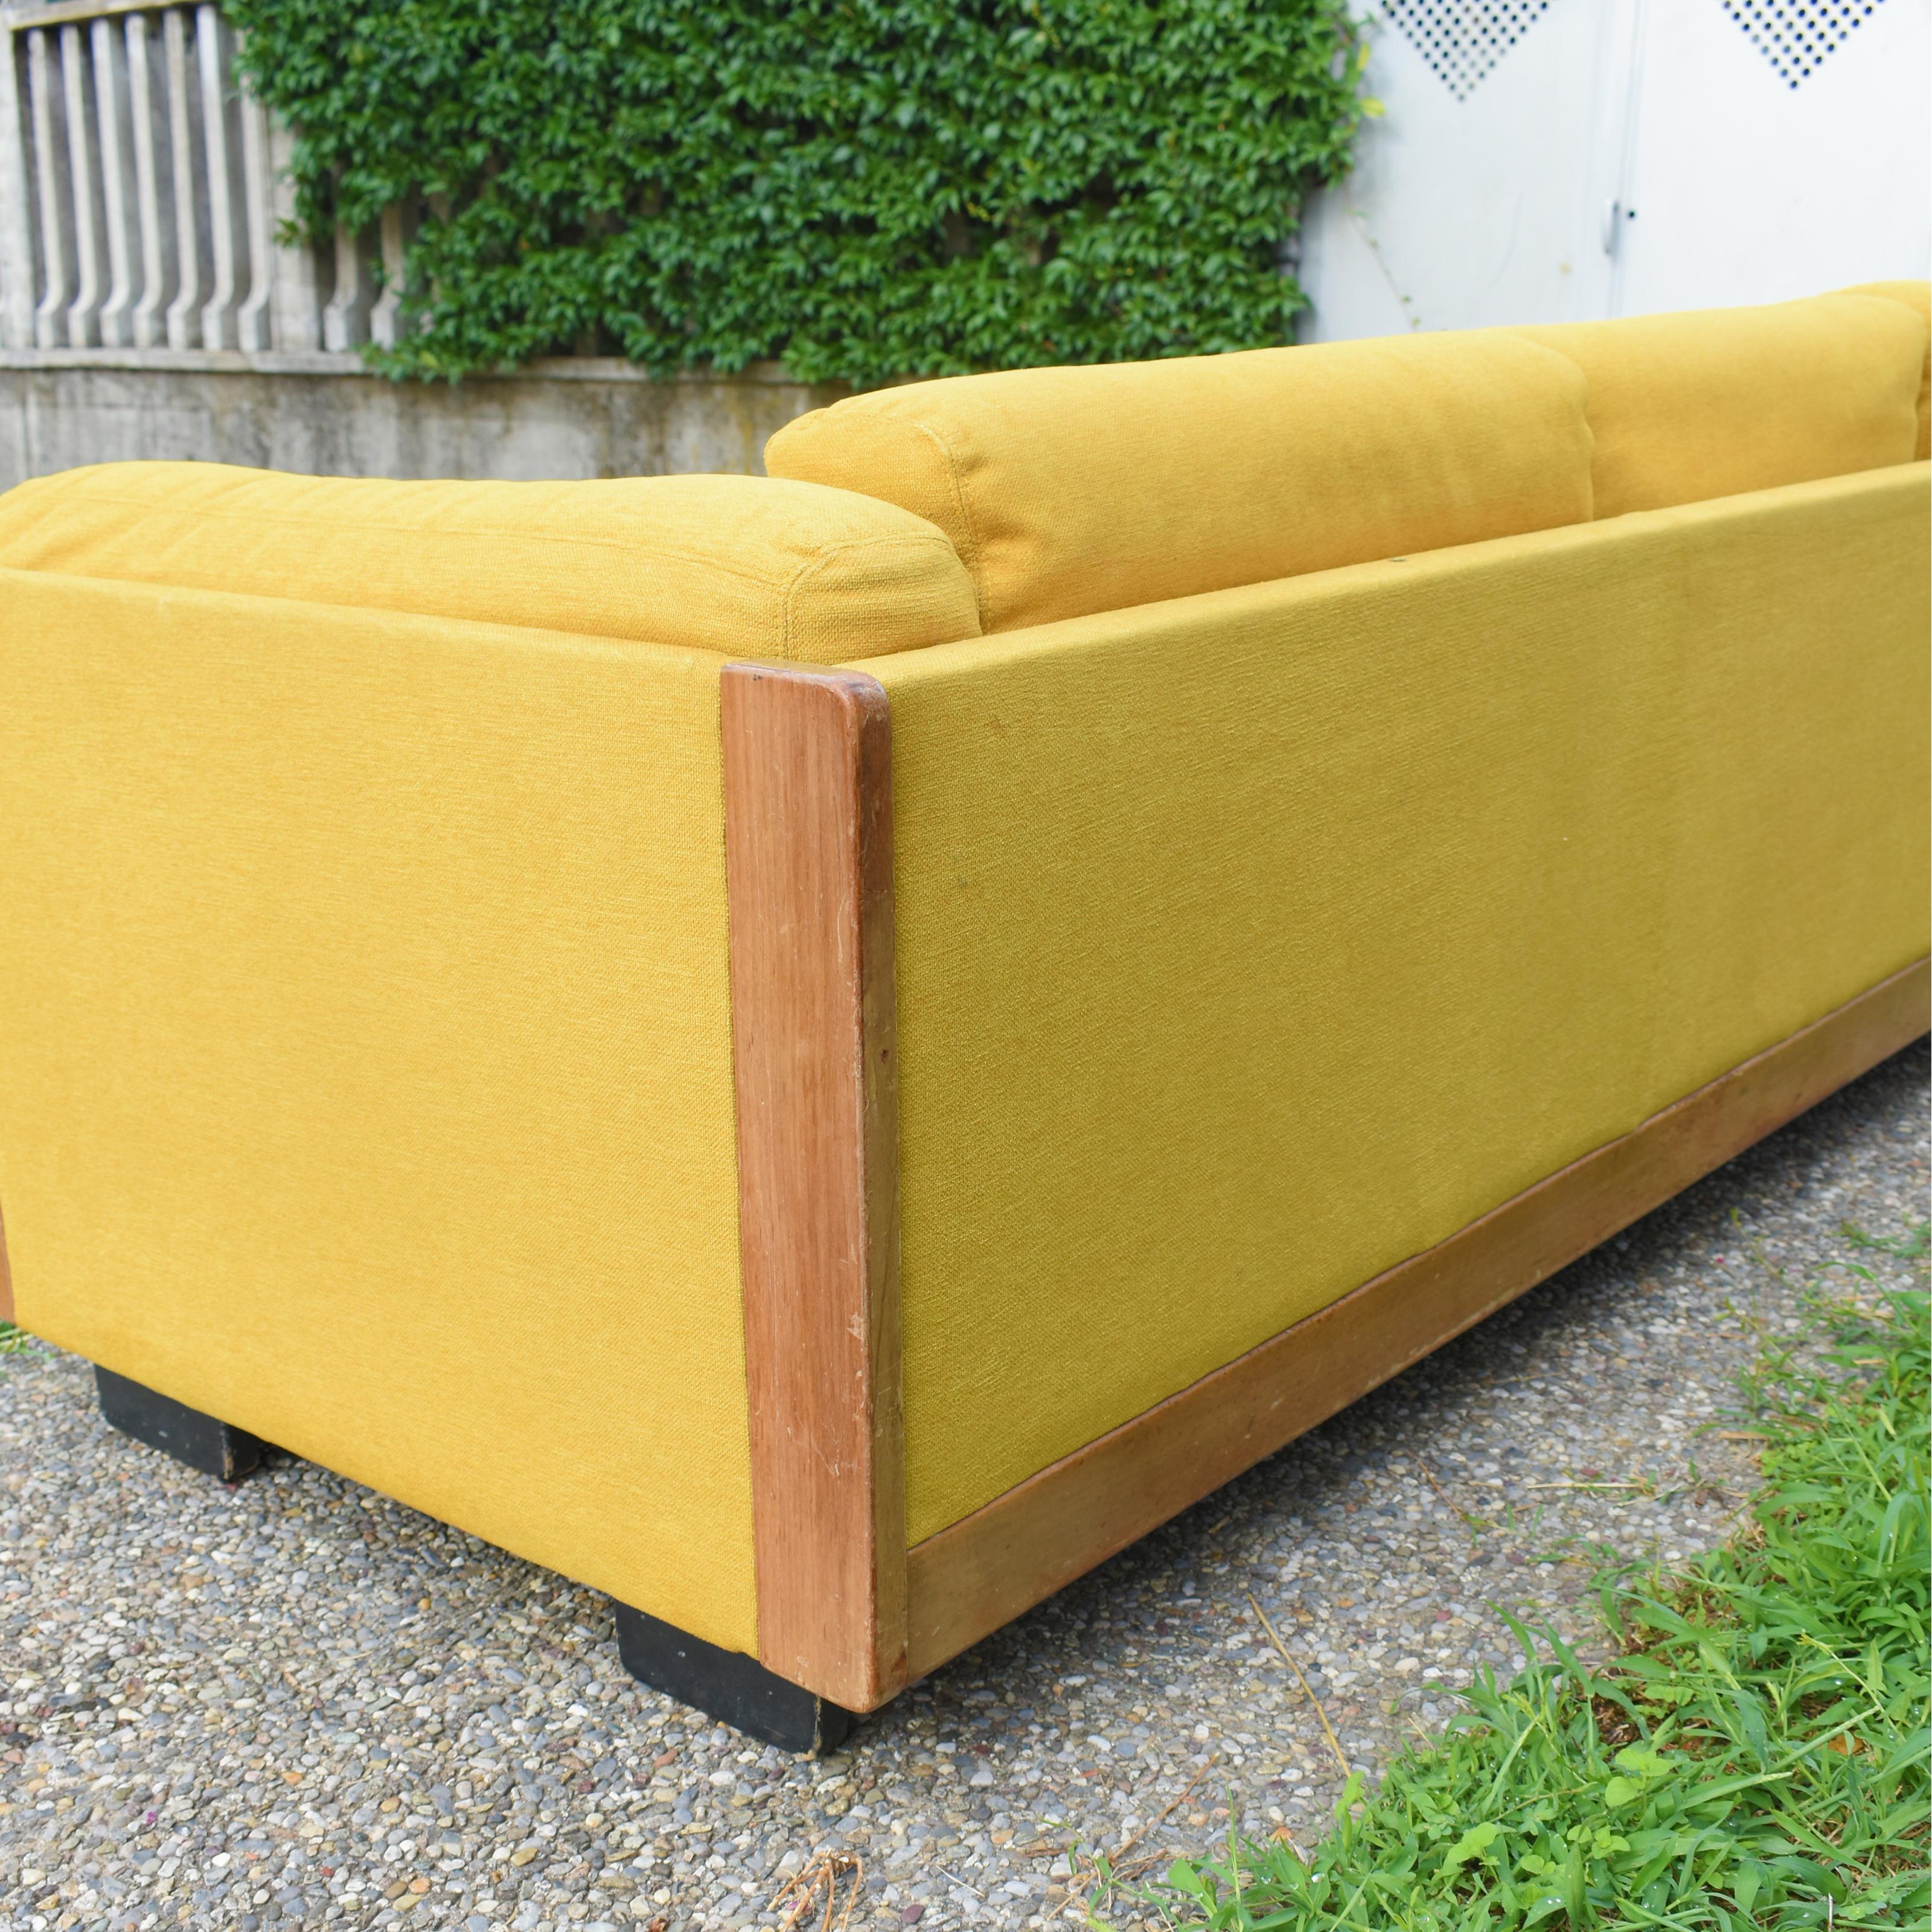 Italian Vintage Sofa Model 920 from the 1960s, Design by Afra &Tobia Scarpa